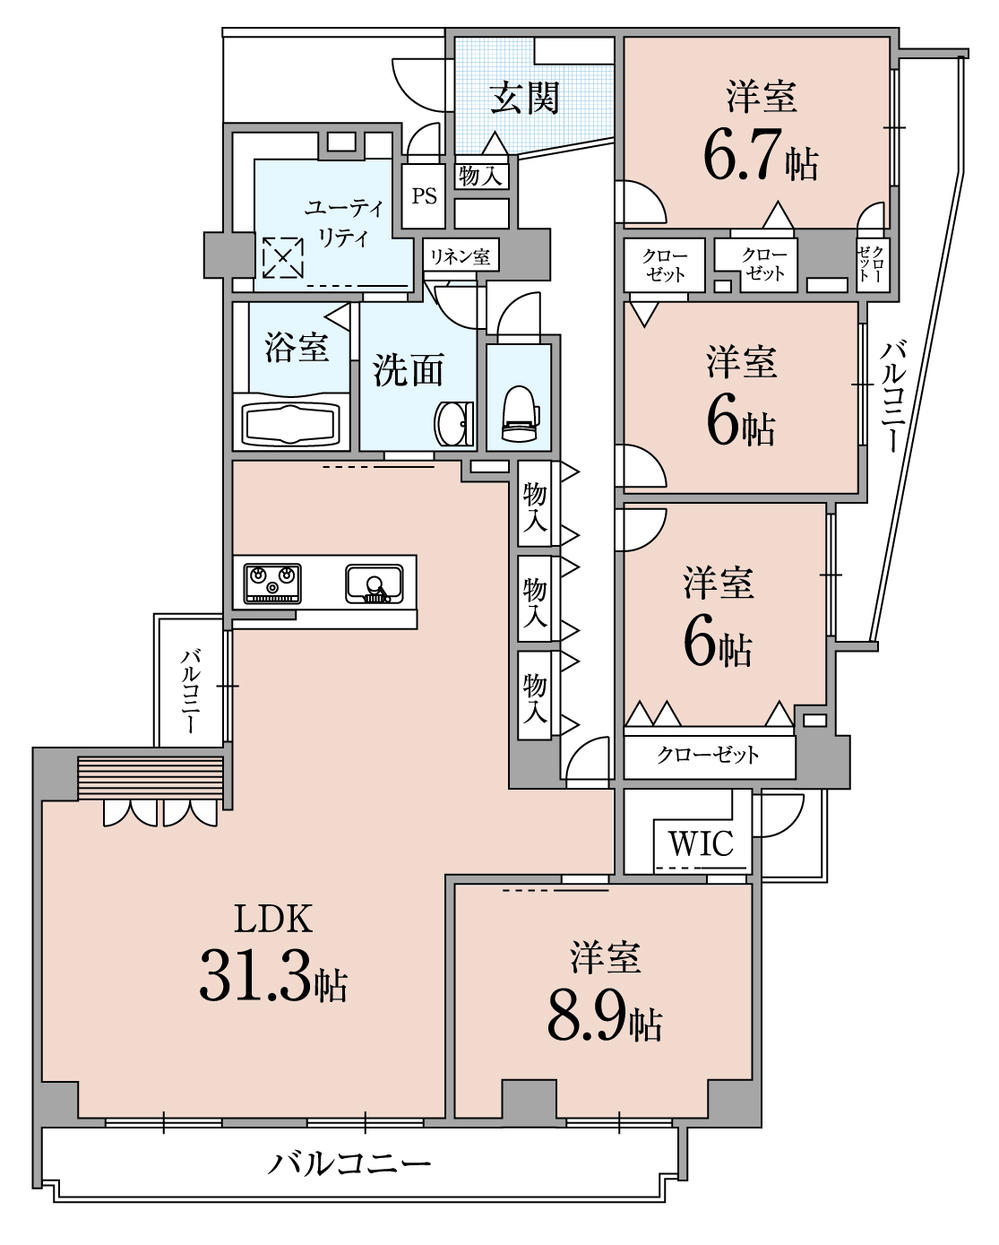 Floor plan. 4LDK, Price 25,800,000 yen, Footprint 141.05 sq m , Balcony area 21.1 sq m skeleton renovation housing (water around ・ Joinery ・ Floor, such as you had made all) unit bus wide 1200mm vanity LDK31.3 quires 1621 size